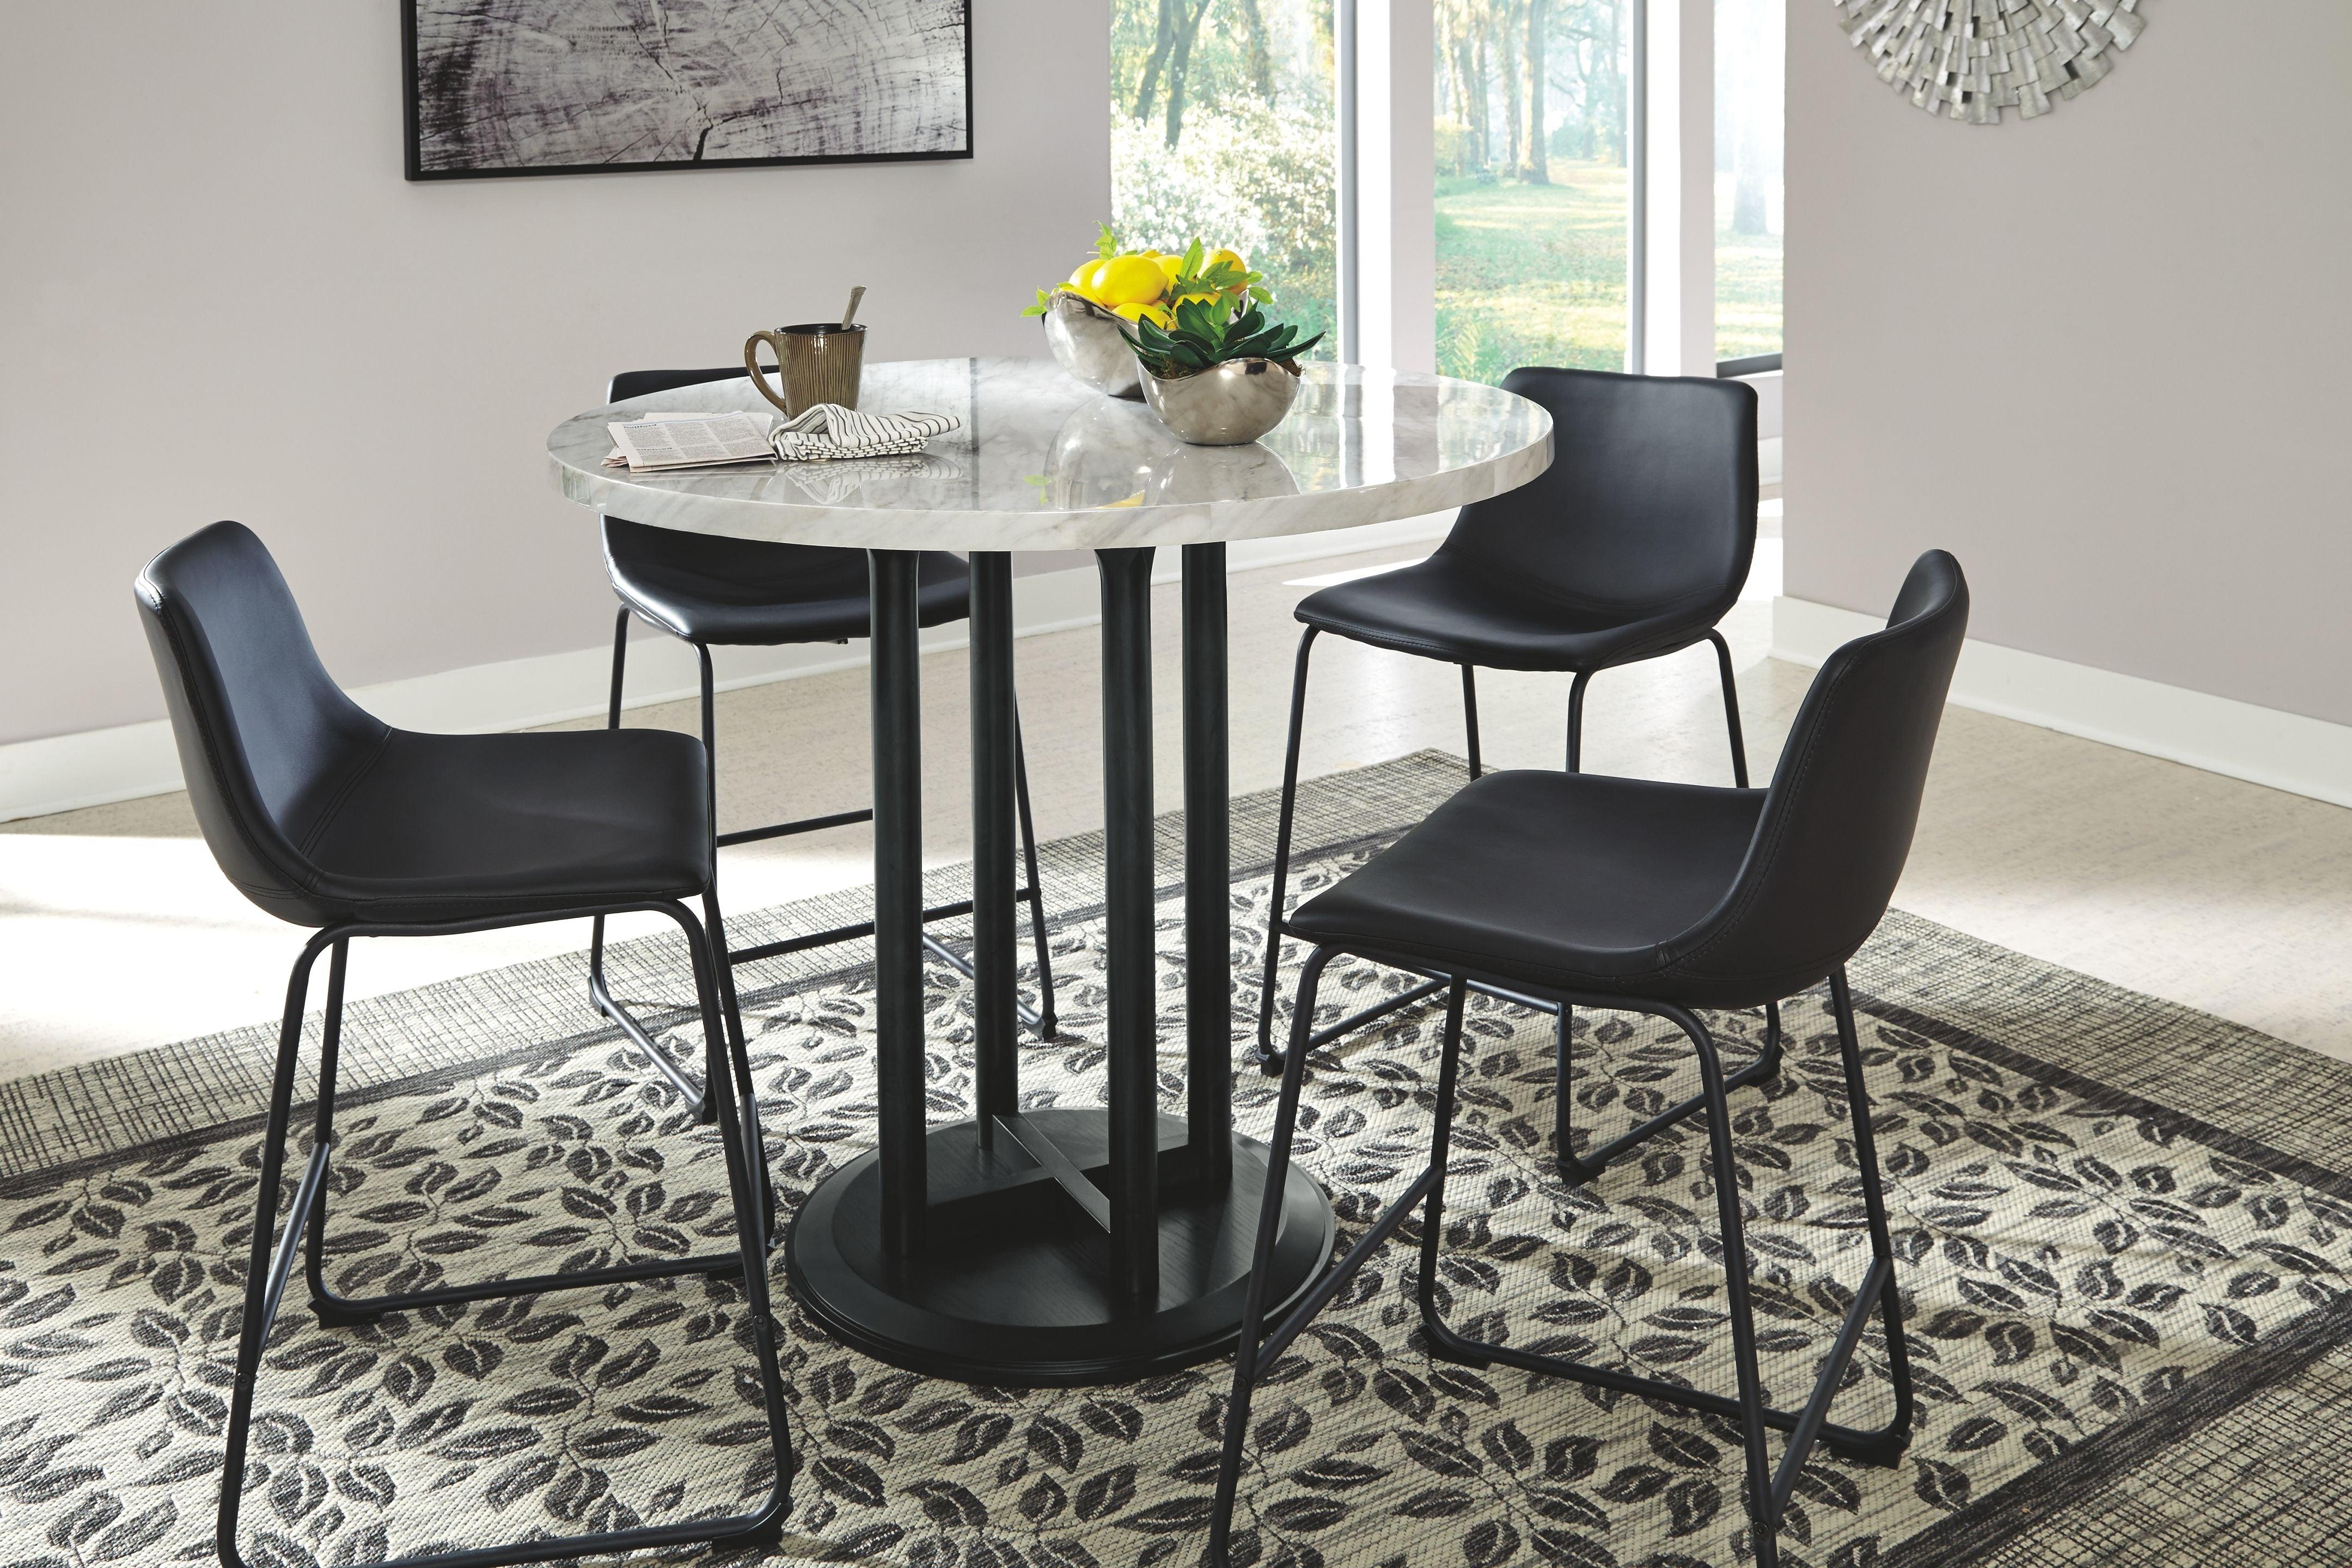 Signature Design by Ashley® - Centiar - Black / Gray - 5 Pc. - Counter Table, 4 Upholstered Barstools - 5th Avenue Furniture